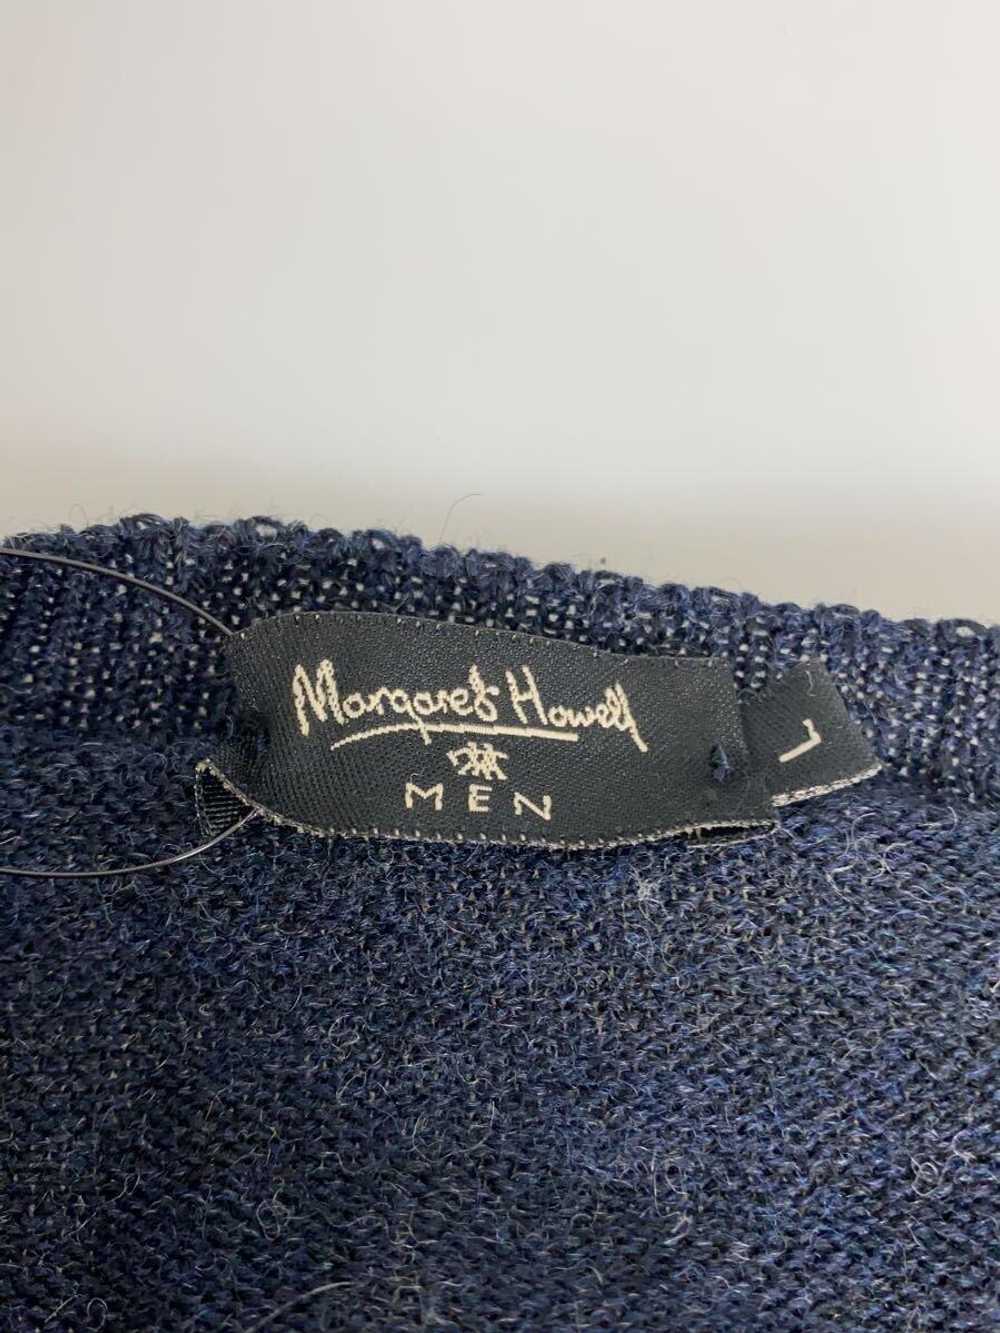 Men's Margaret Howell Sweater Thick/L/Wool/Nvy - image 3